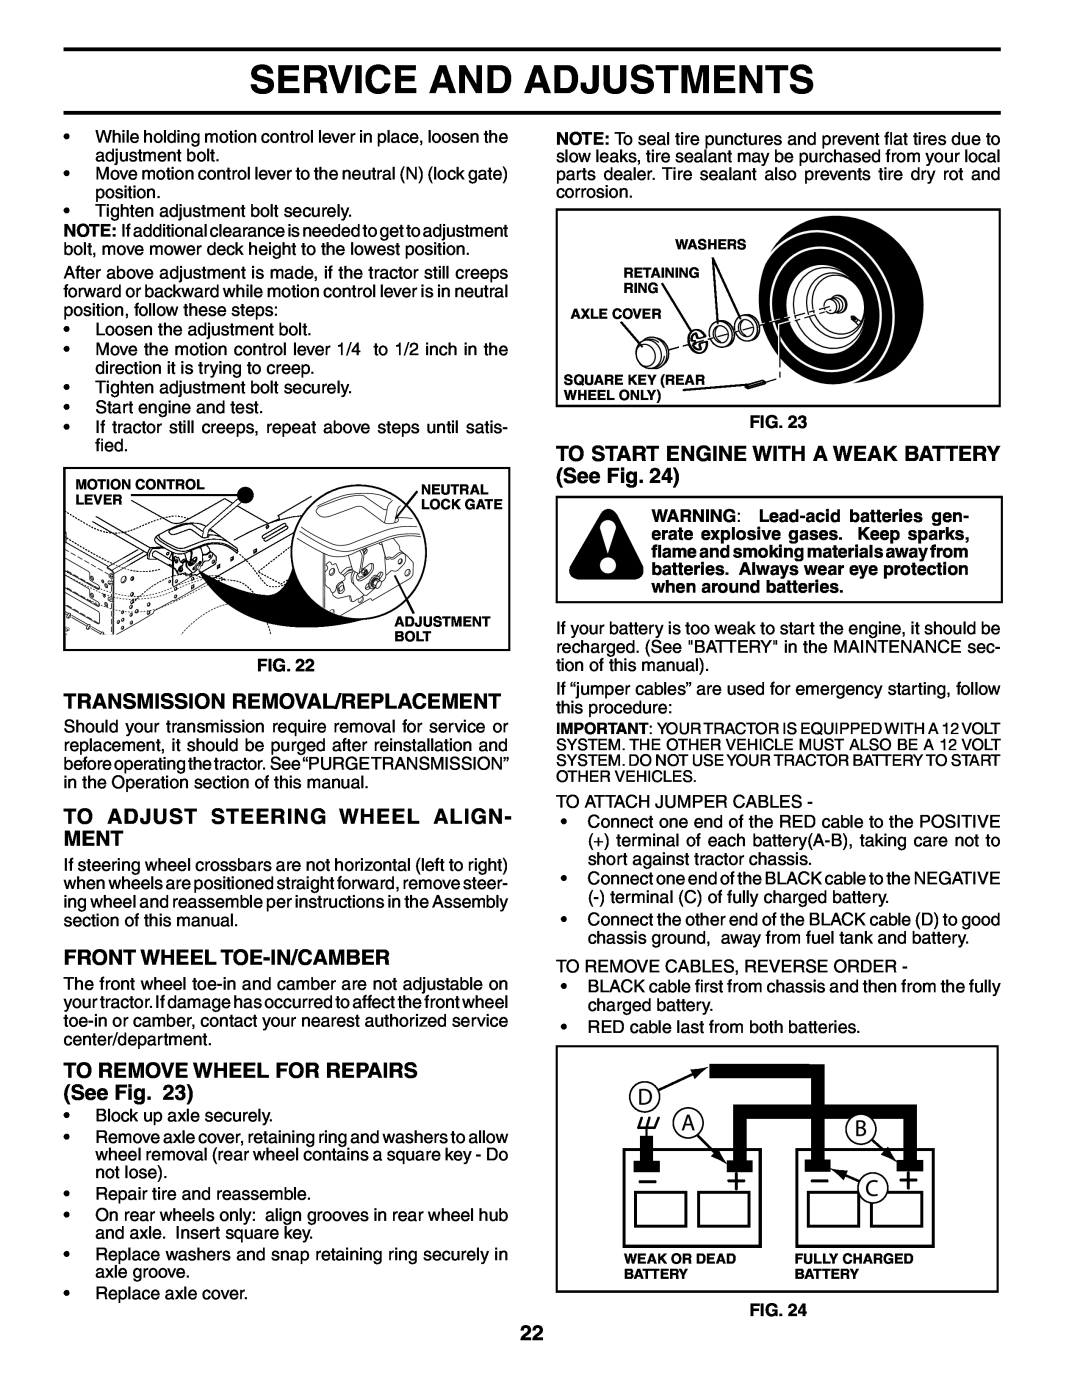 Poulan 194563 manual Transmission Removal/Replacement, To Adjust Steering Wheel Align- Ment, Front Wheel Toe-In/Camber 